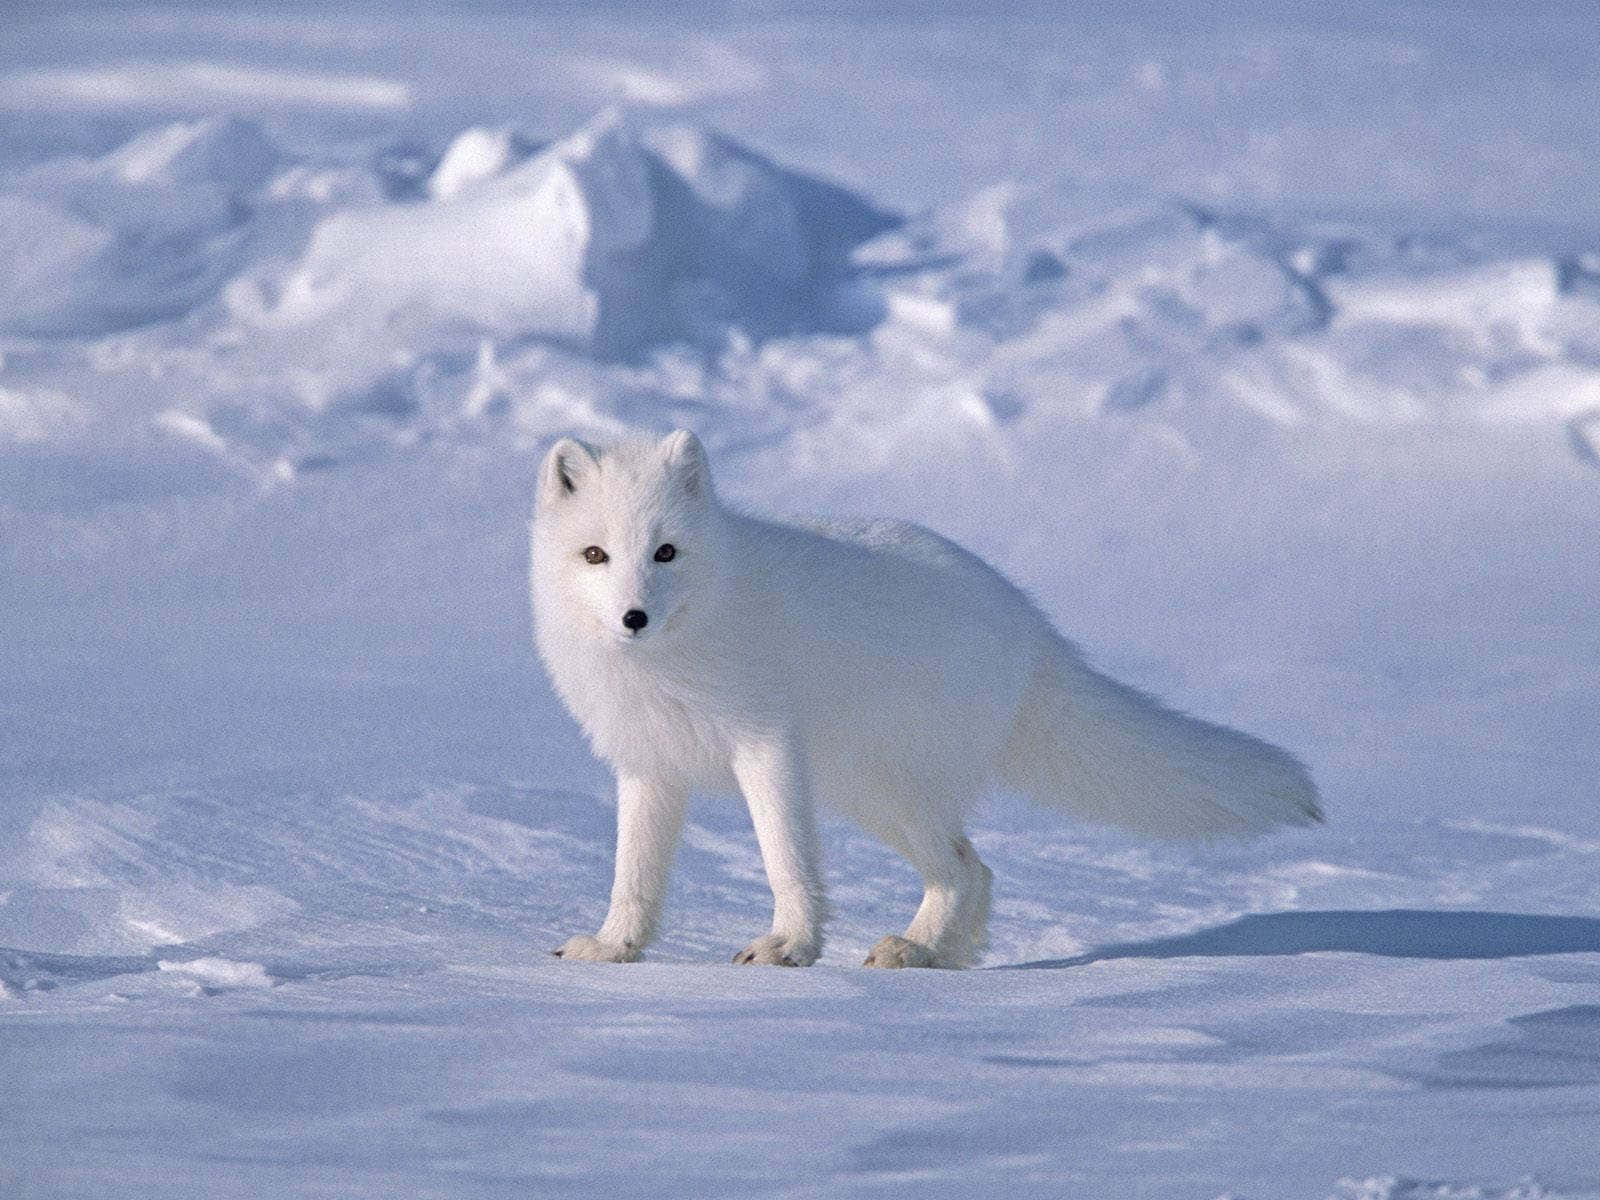 A Sweet Arctic Fox Blends Into the Snowy Environment